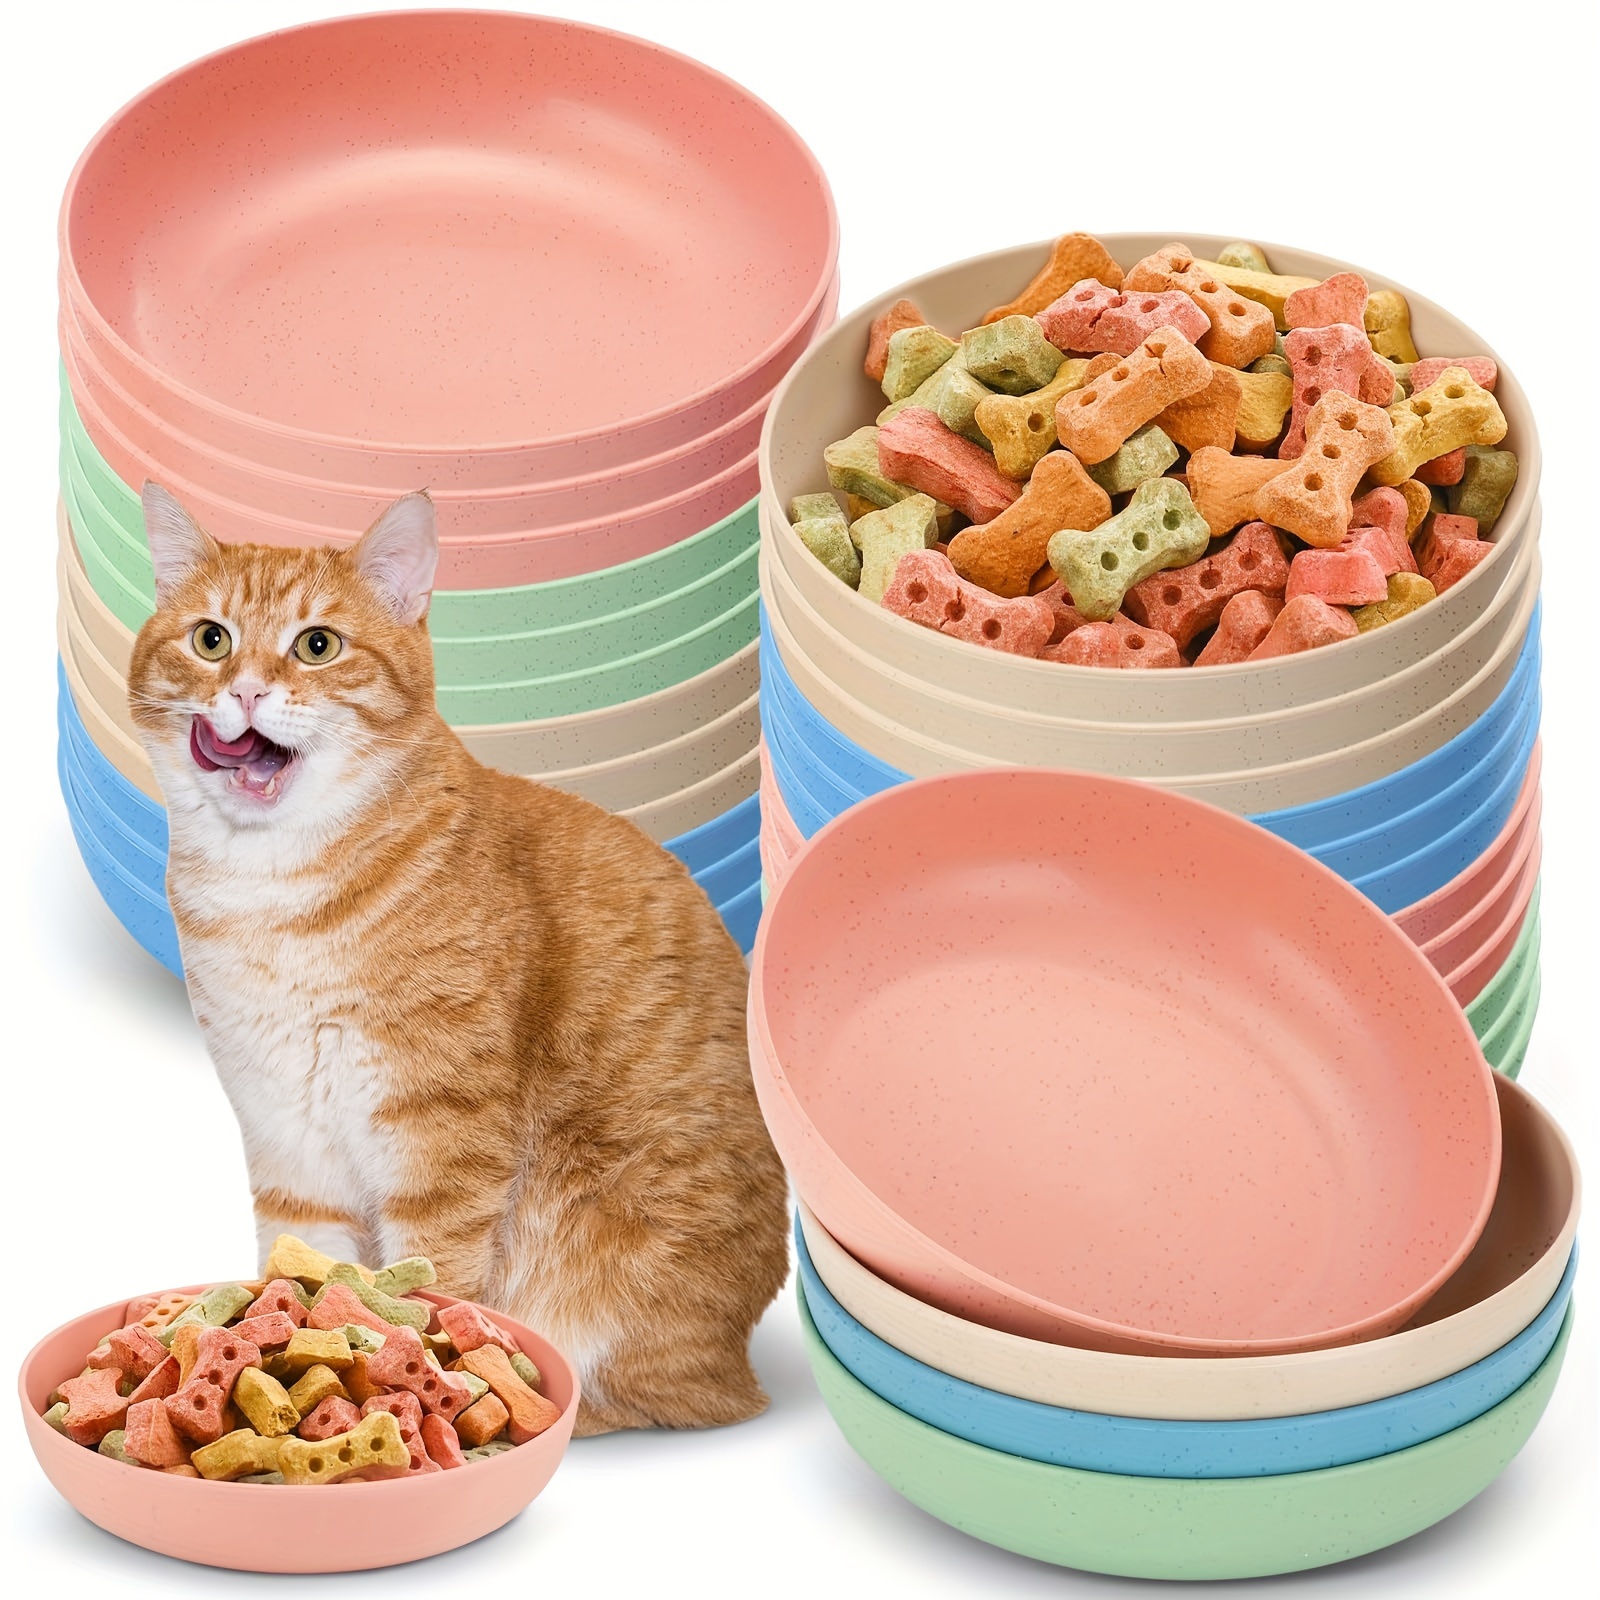 

4pcs Cat Bowls, 5.5 Inch Wide Shallow Pet Food & Water Dishes, Plastic Non-slip Colorful Feeding Plates For Small Cats, Kittens, And Short-legged Breeds